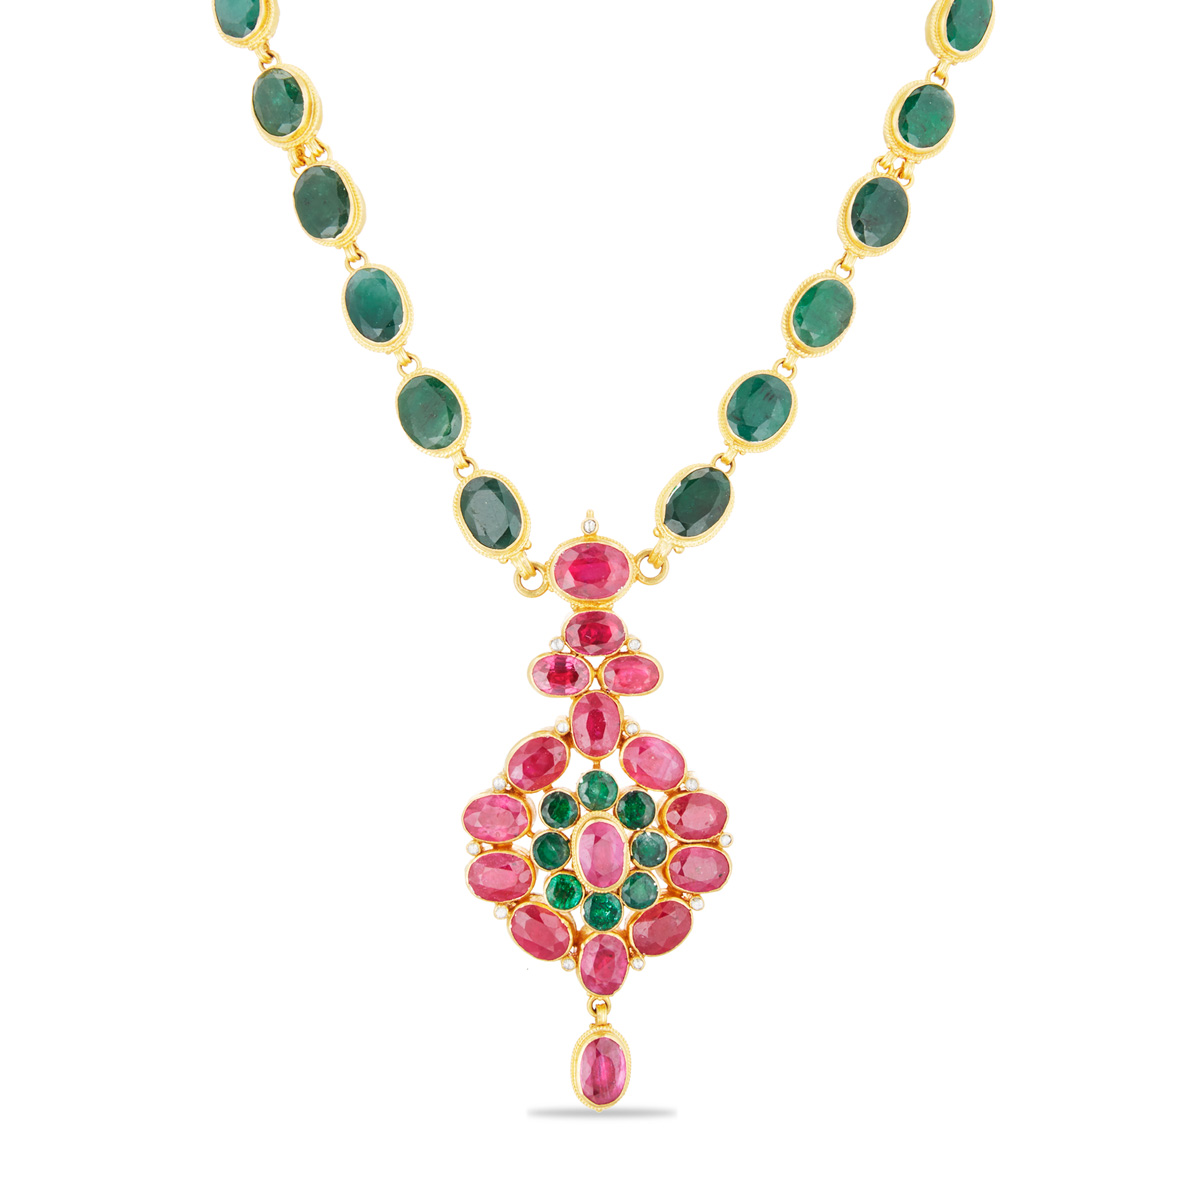 Short Necklace for Traditional Look